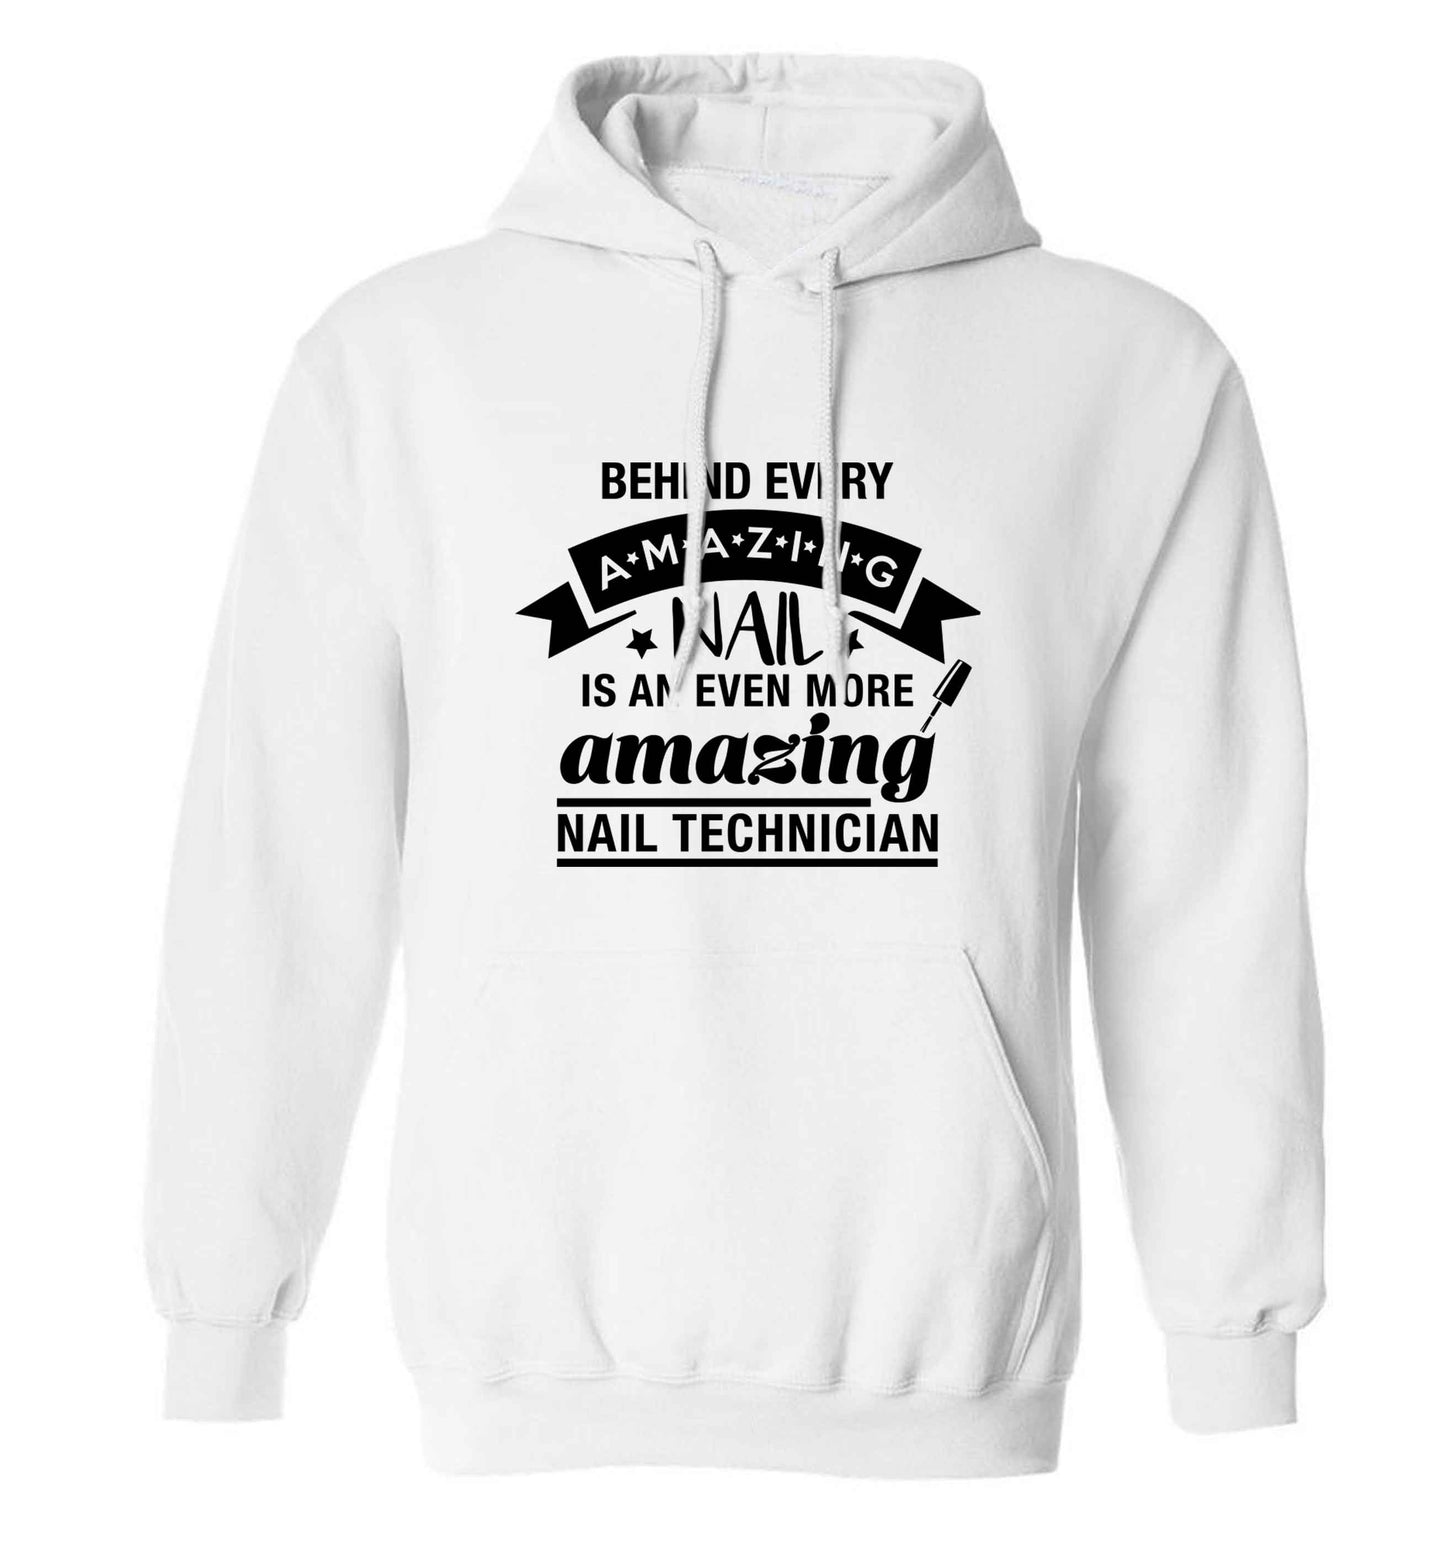 Behind every amazing nail is an even more amazing nail technician adults unisex white hoodie 2XL